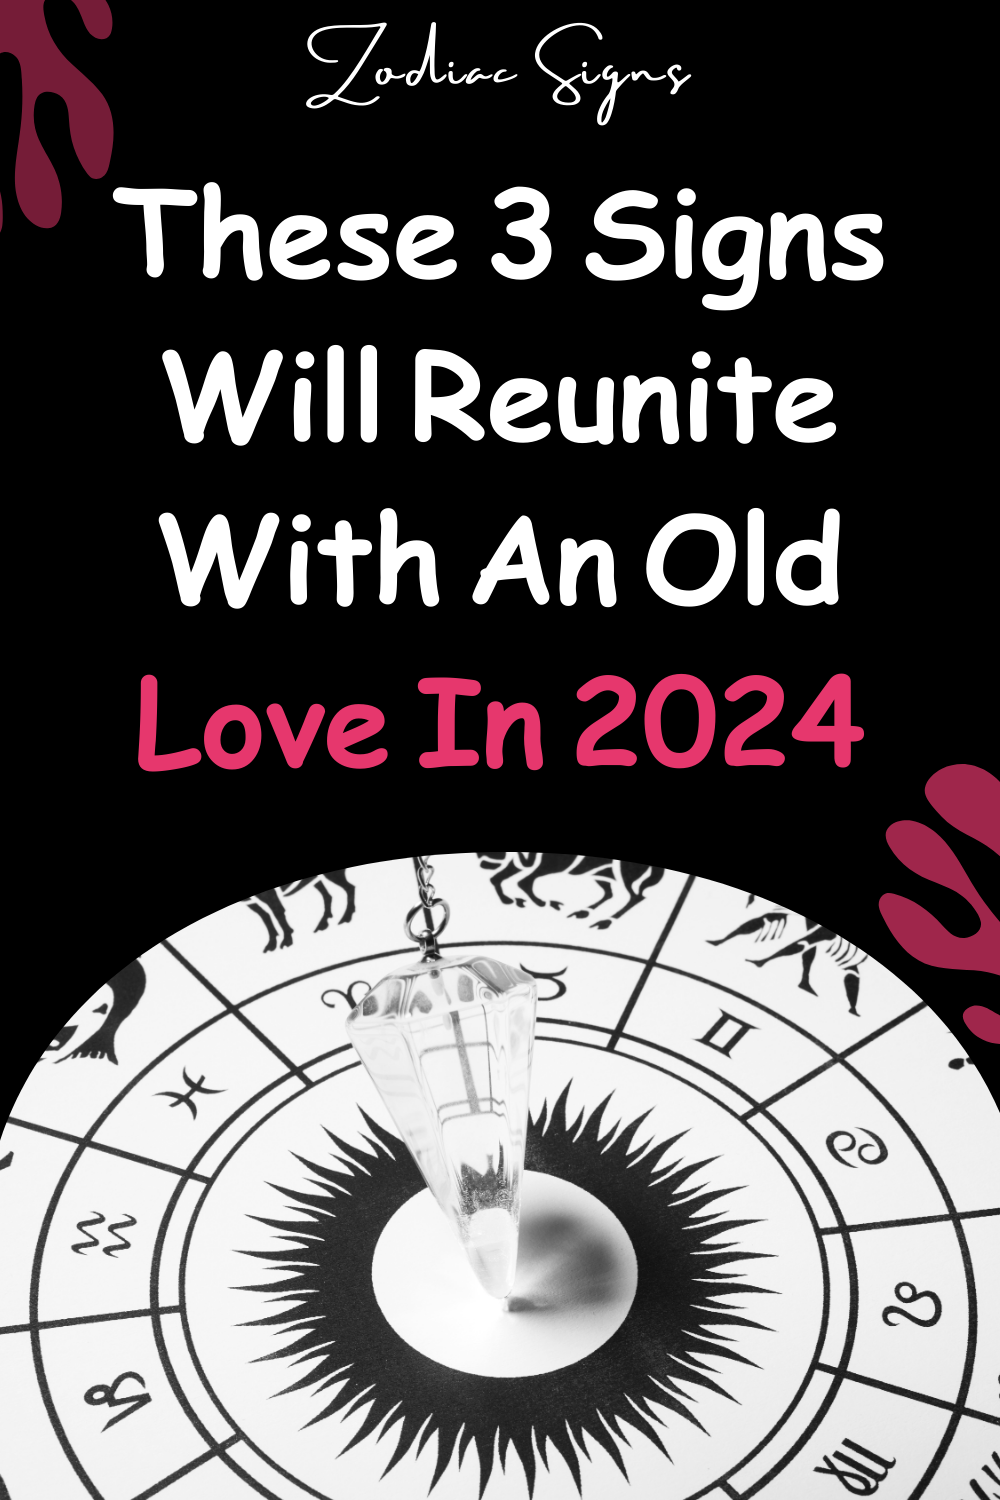 These 3 Signs Will Reunite With An Old Love In 2024